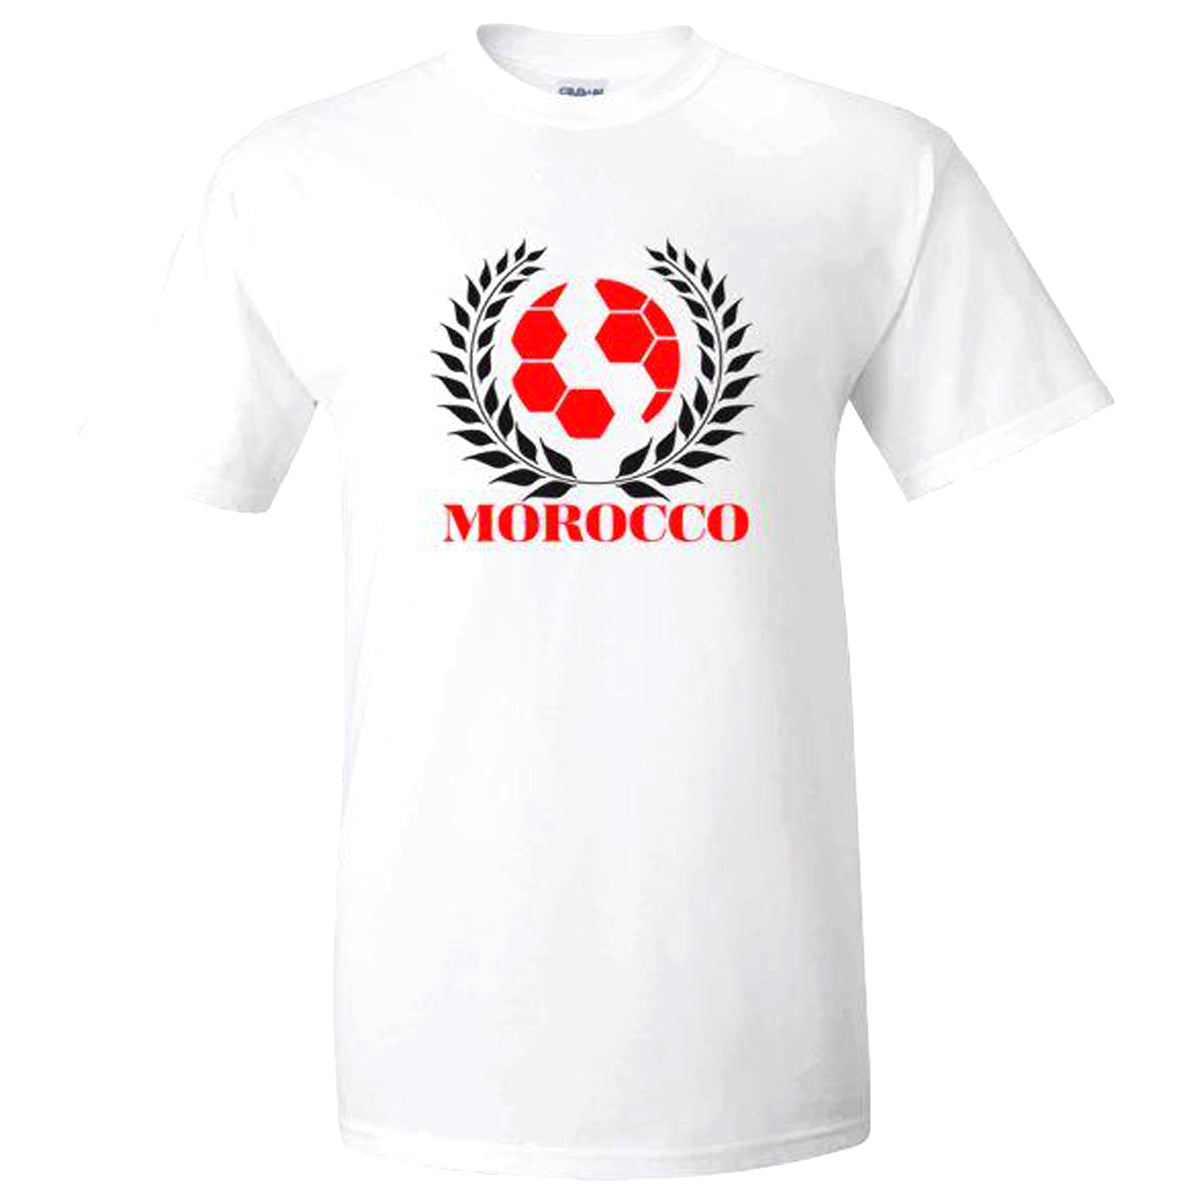 Morocco World Cup 2022 Spirit Tee | Various Designs Shirt 411 Leaves Youth Medium Youth